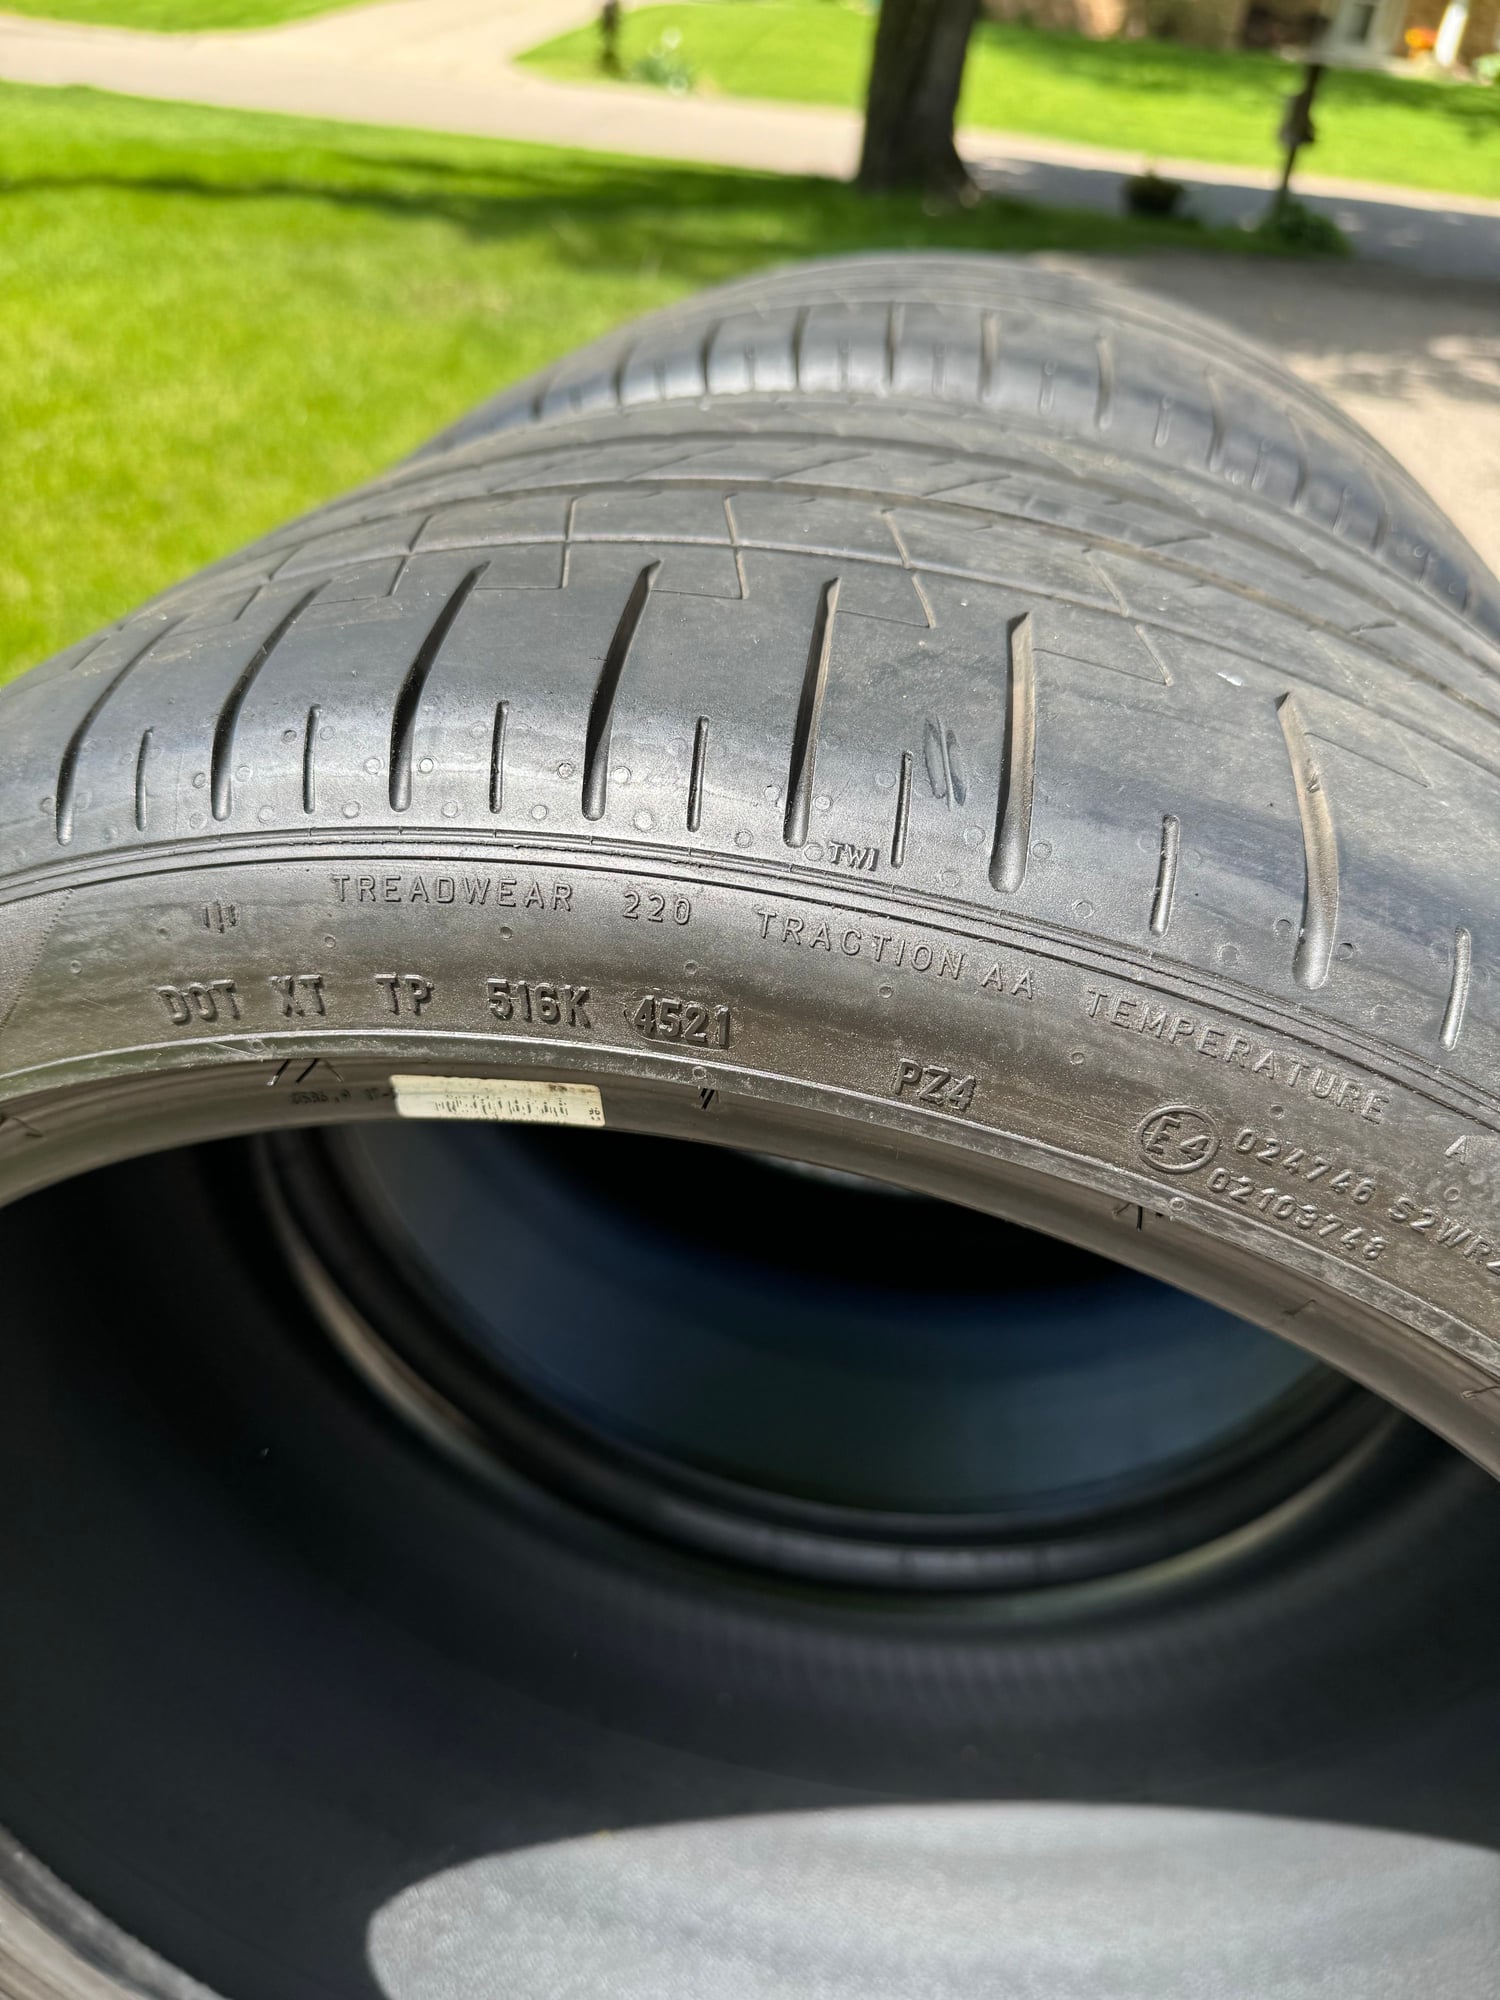 Wheels and Tires/Axles - Original 992 20/21" Pirelli PZero PZ4 Summer Tires - 90%+ Tread - Used - -1 to 2025  All Models - Chanhassen, MN 55317, United States